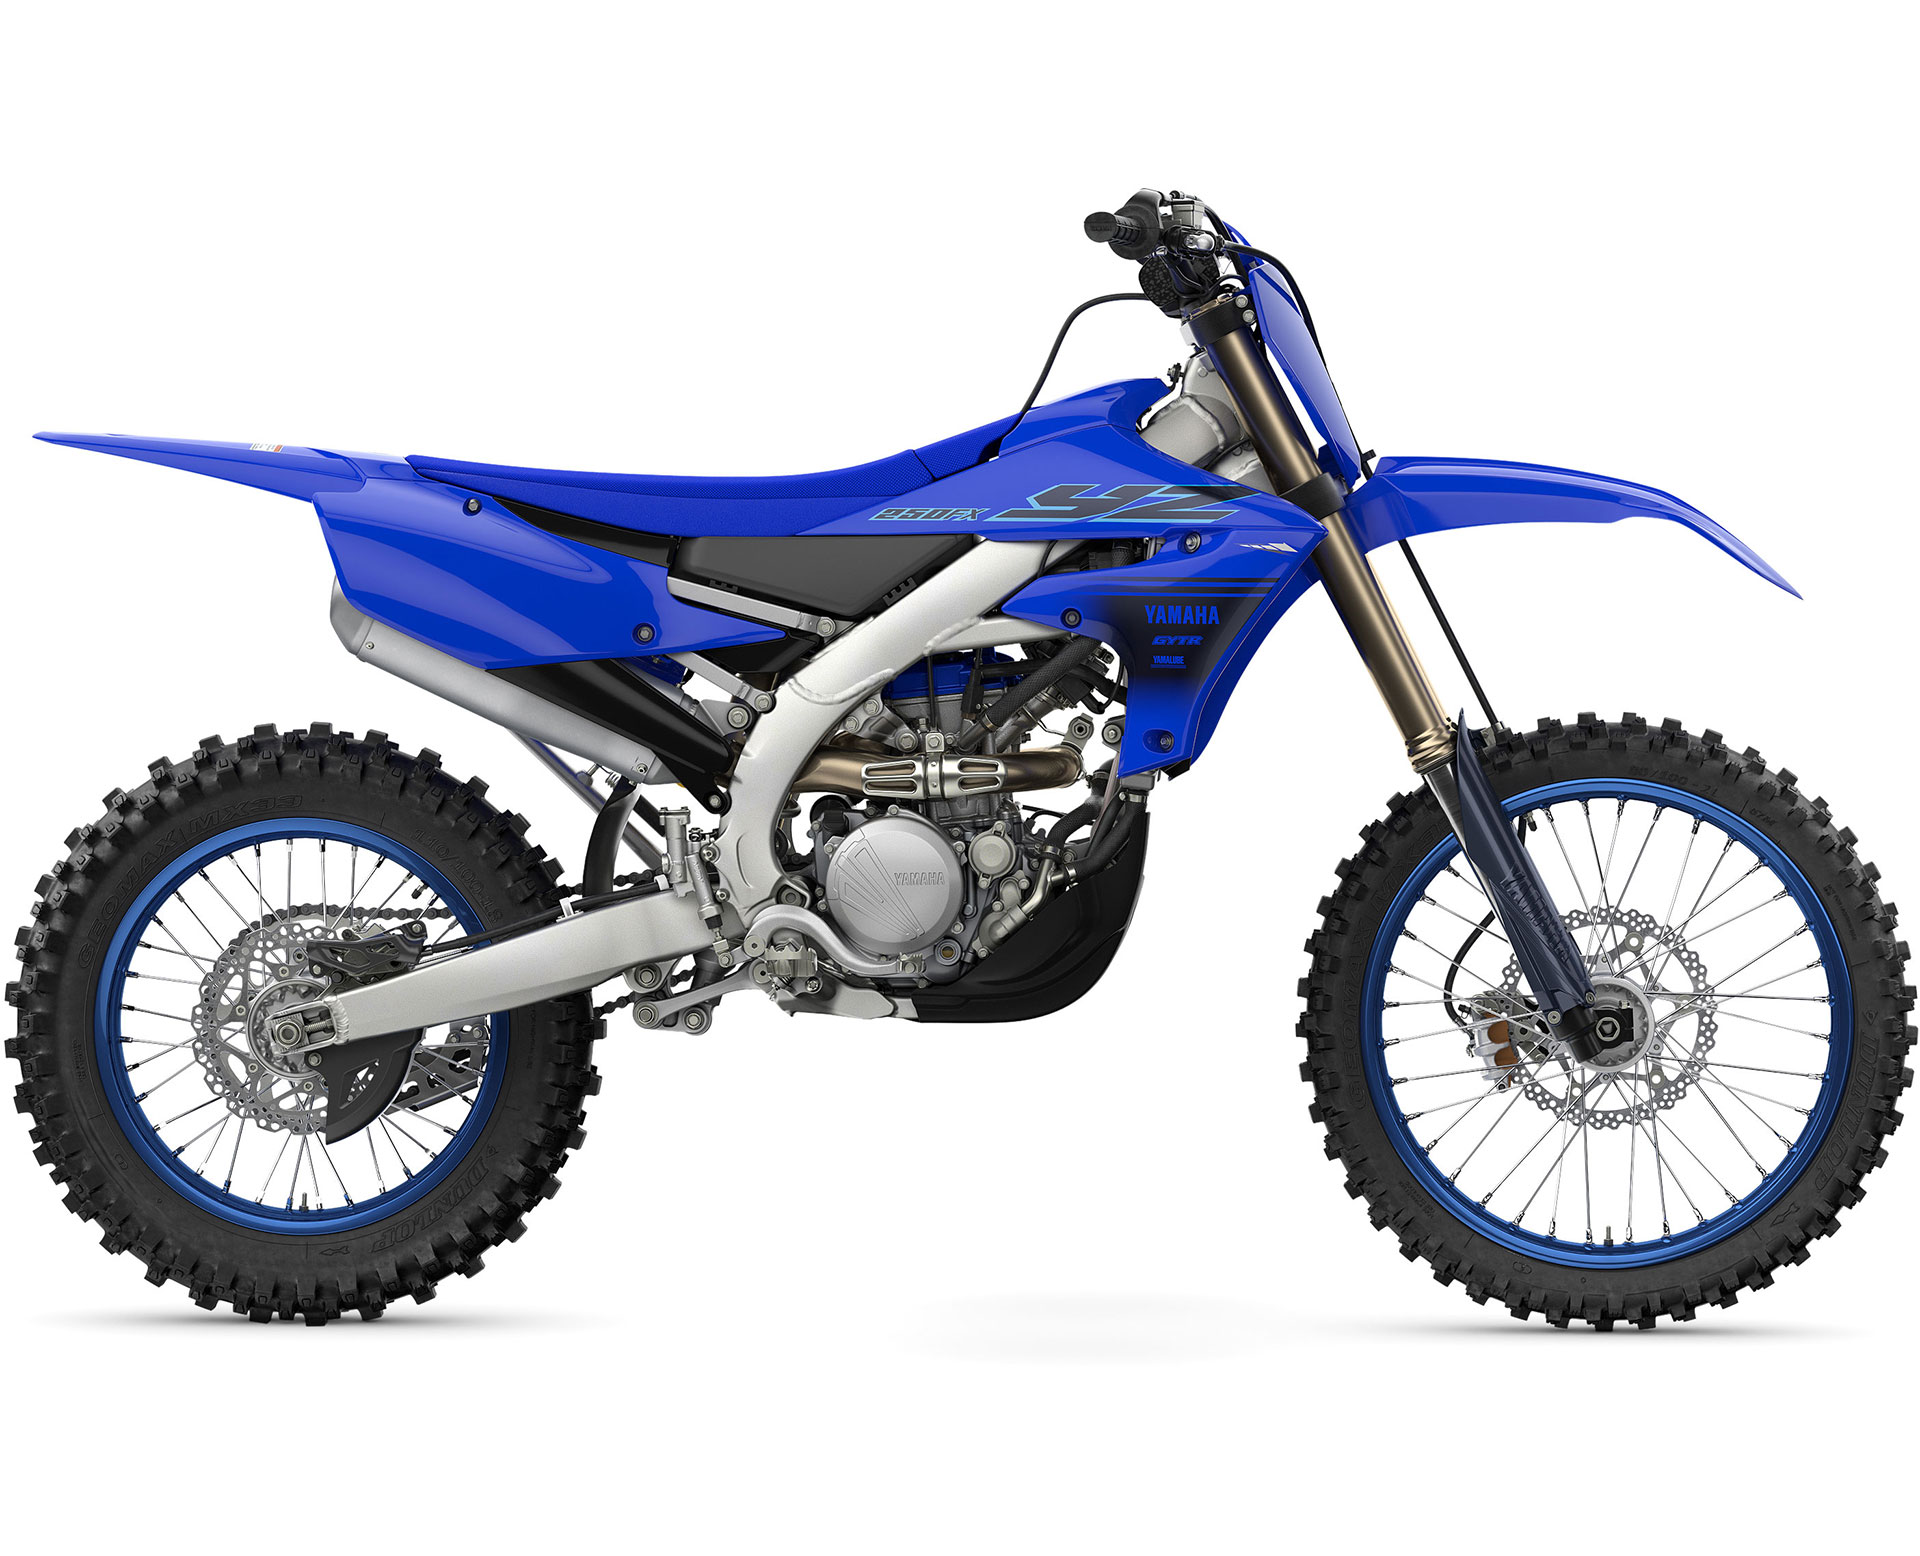 Thumbnail of your customized 2024 YZ250FX